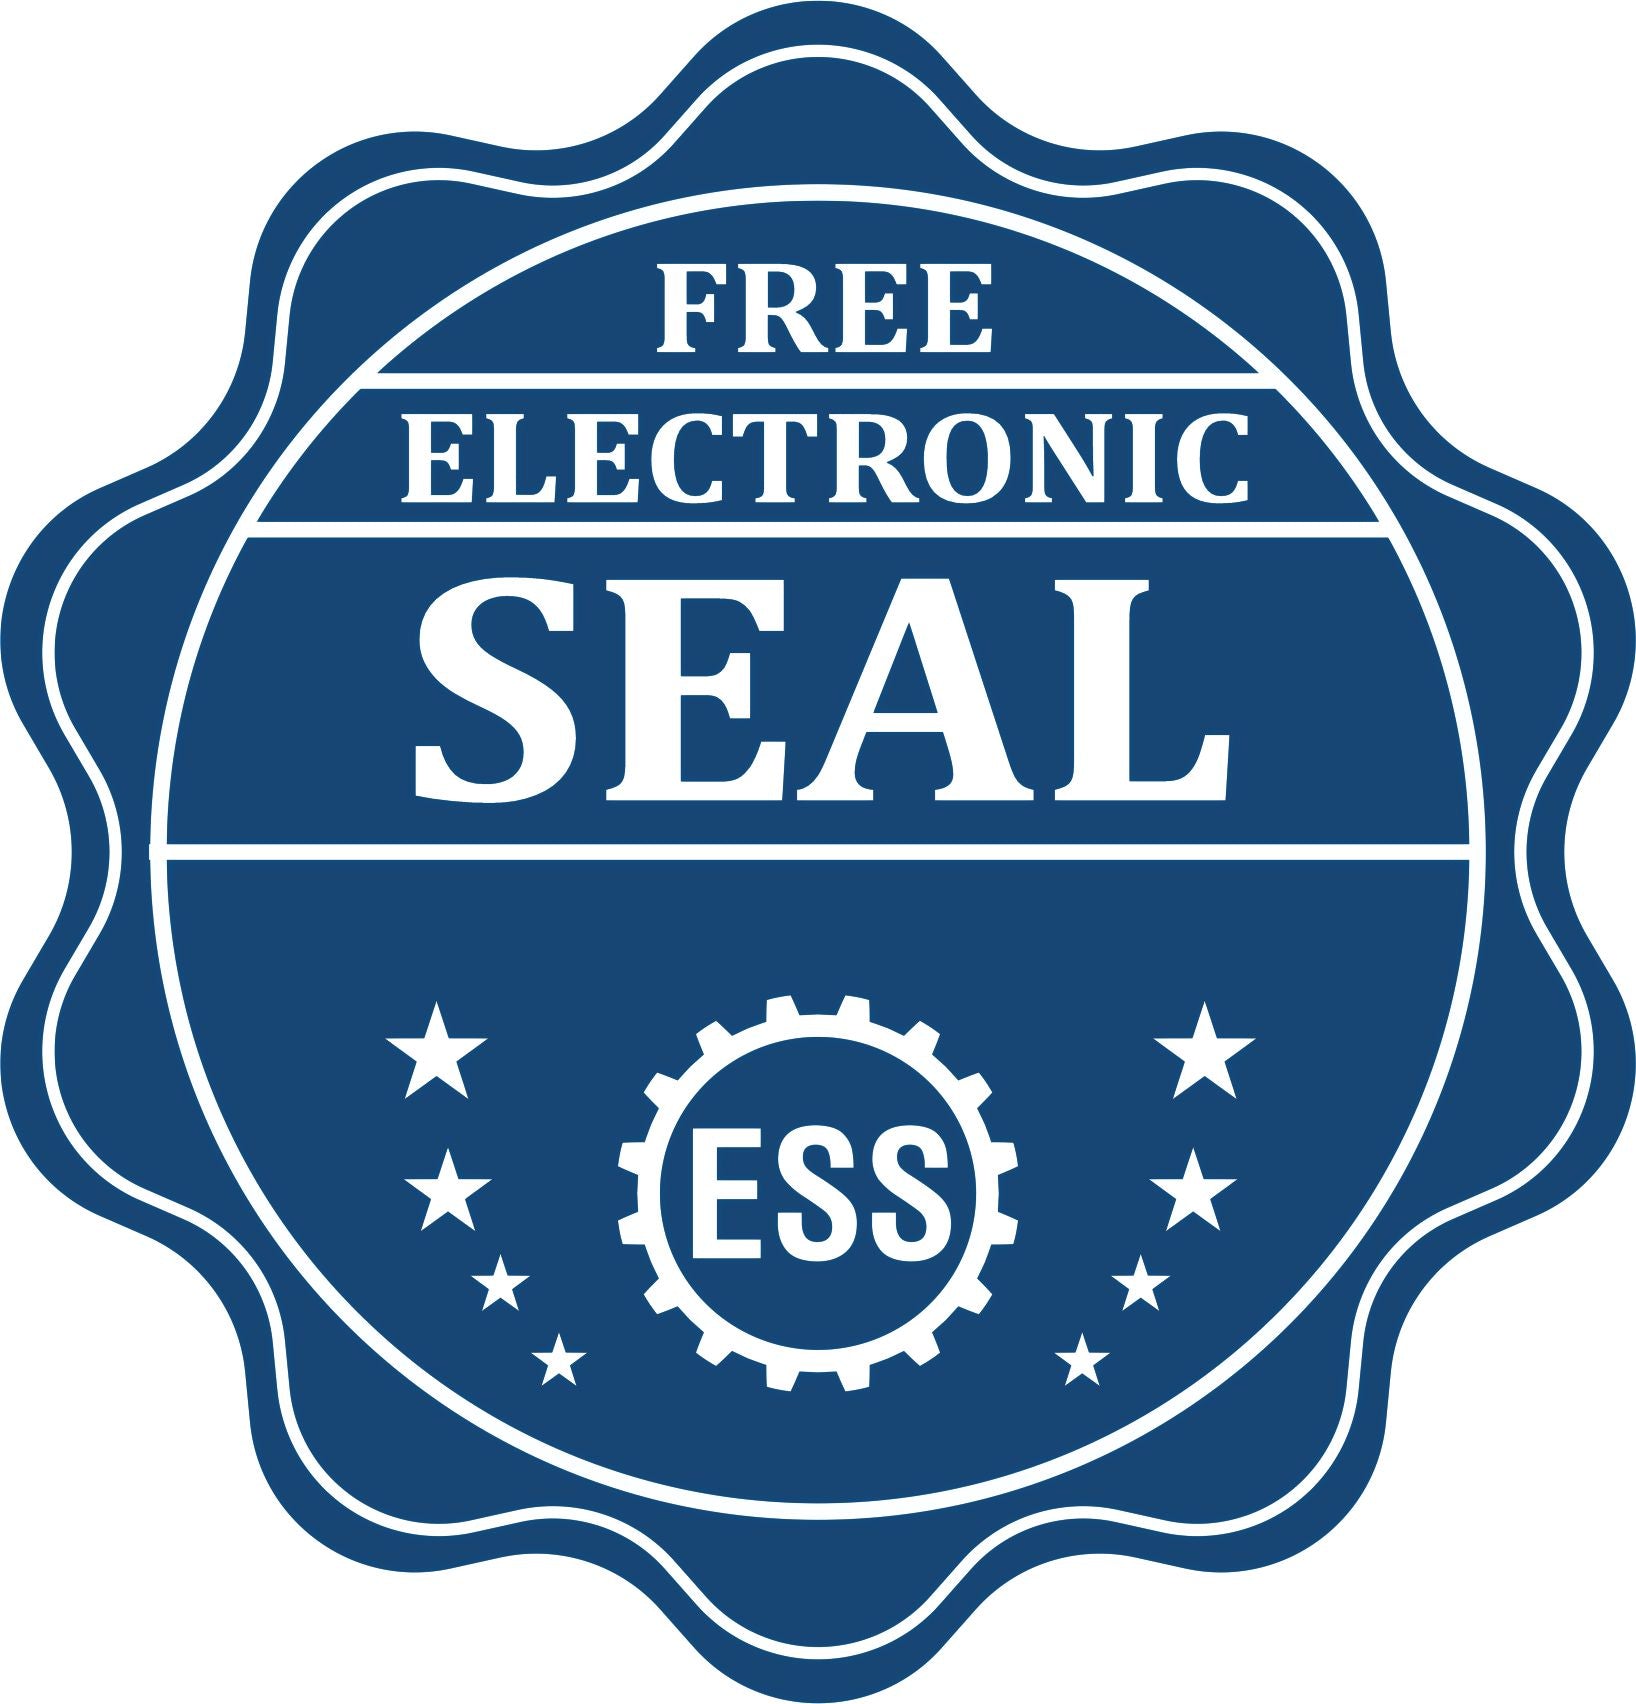 A badge showing a free electronic seal for the Gift South Dakota Architect Seal with stars and the ESS gear on the emblem.